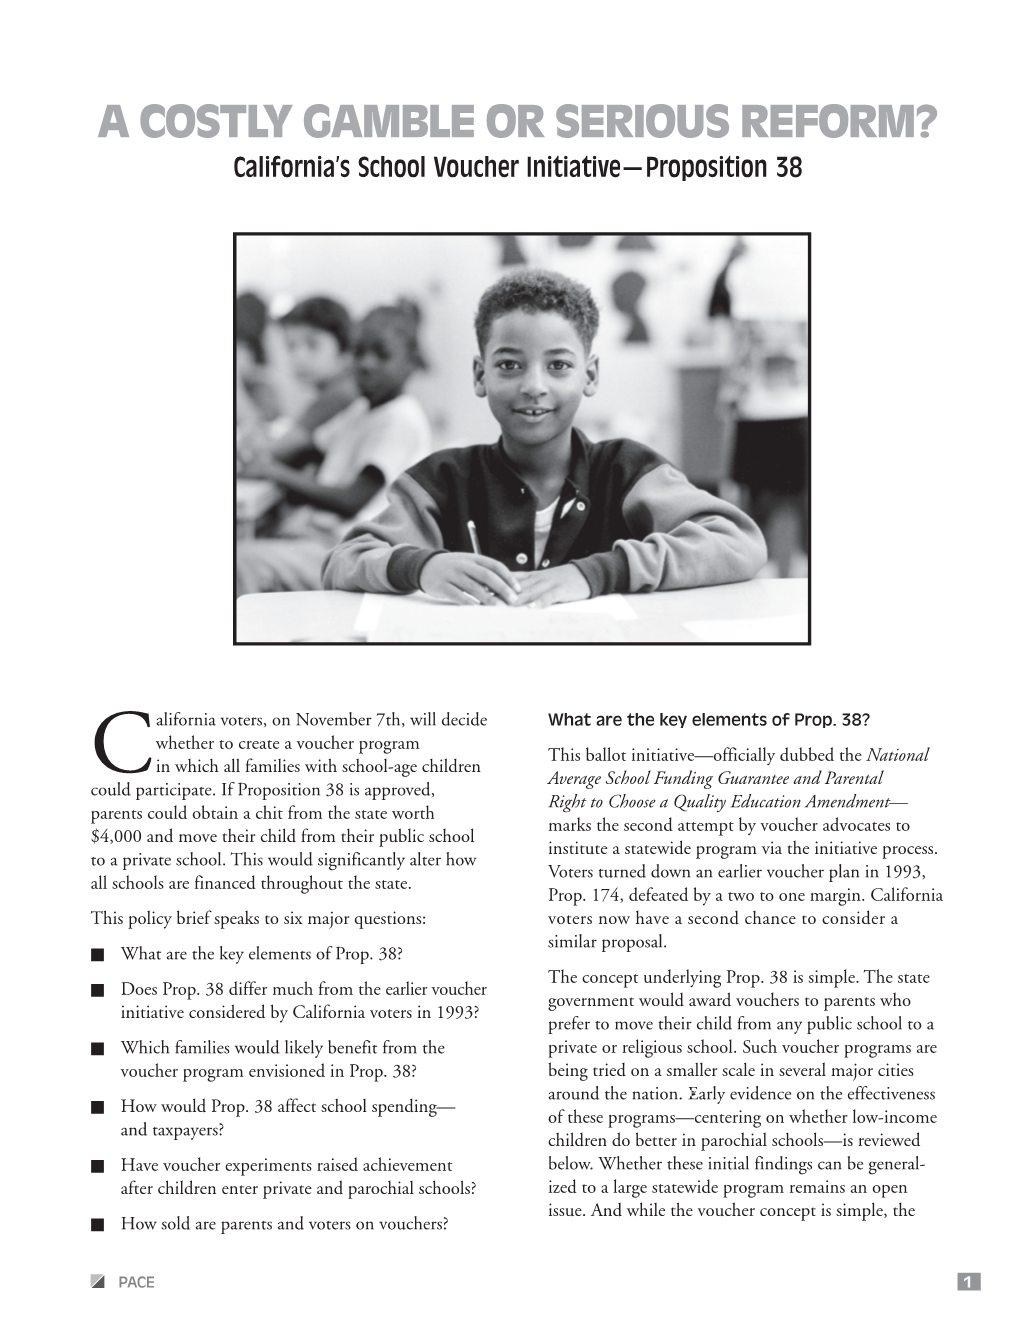 A Costly Gamble Or Serious Reform? California's School Voucher Initiative